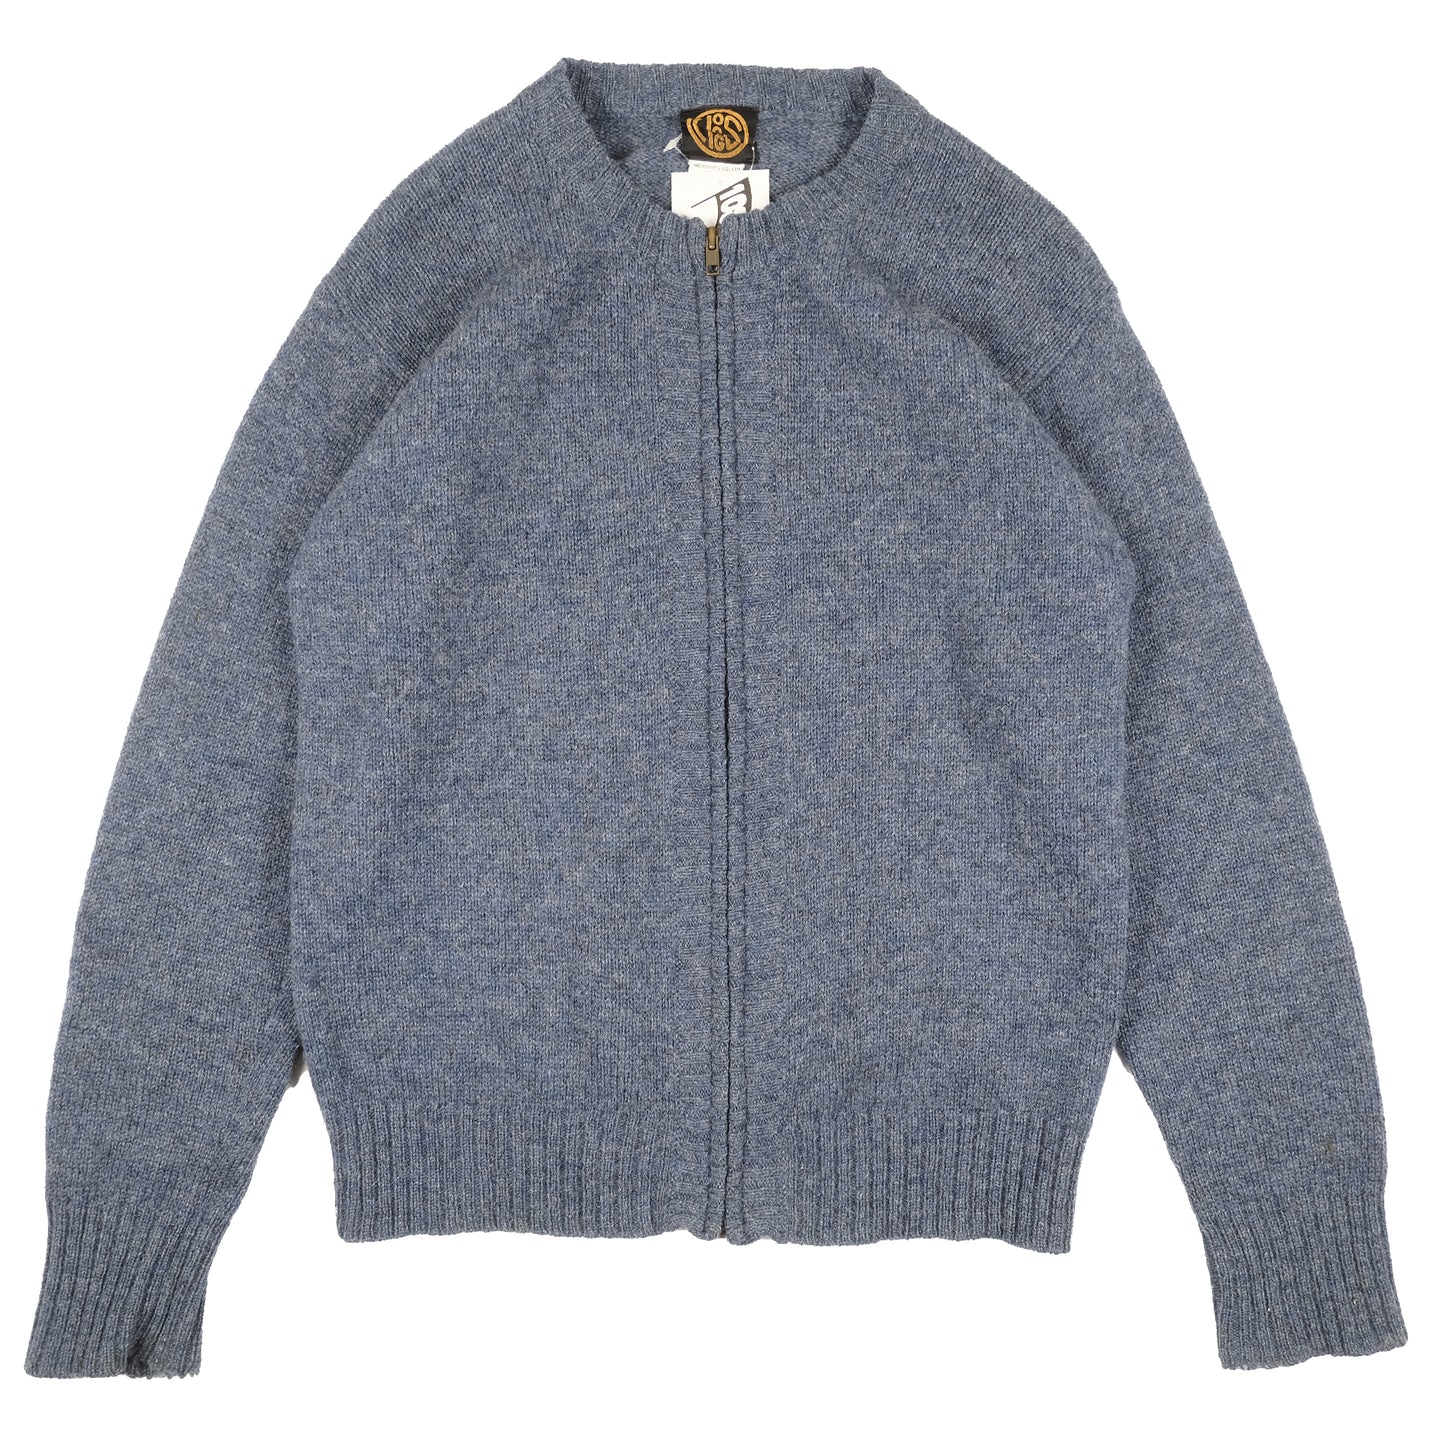 Nepenthes/ Hoggs Knit Cardigan Zip Up